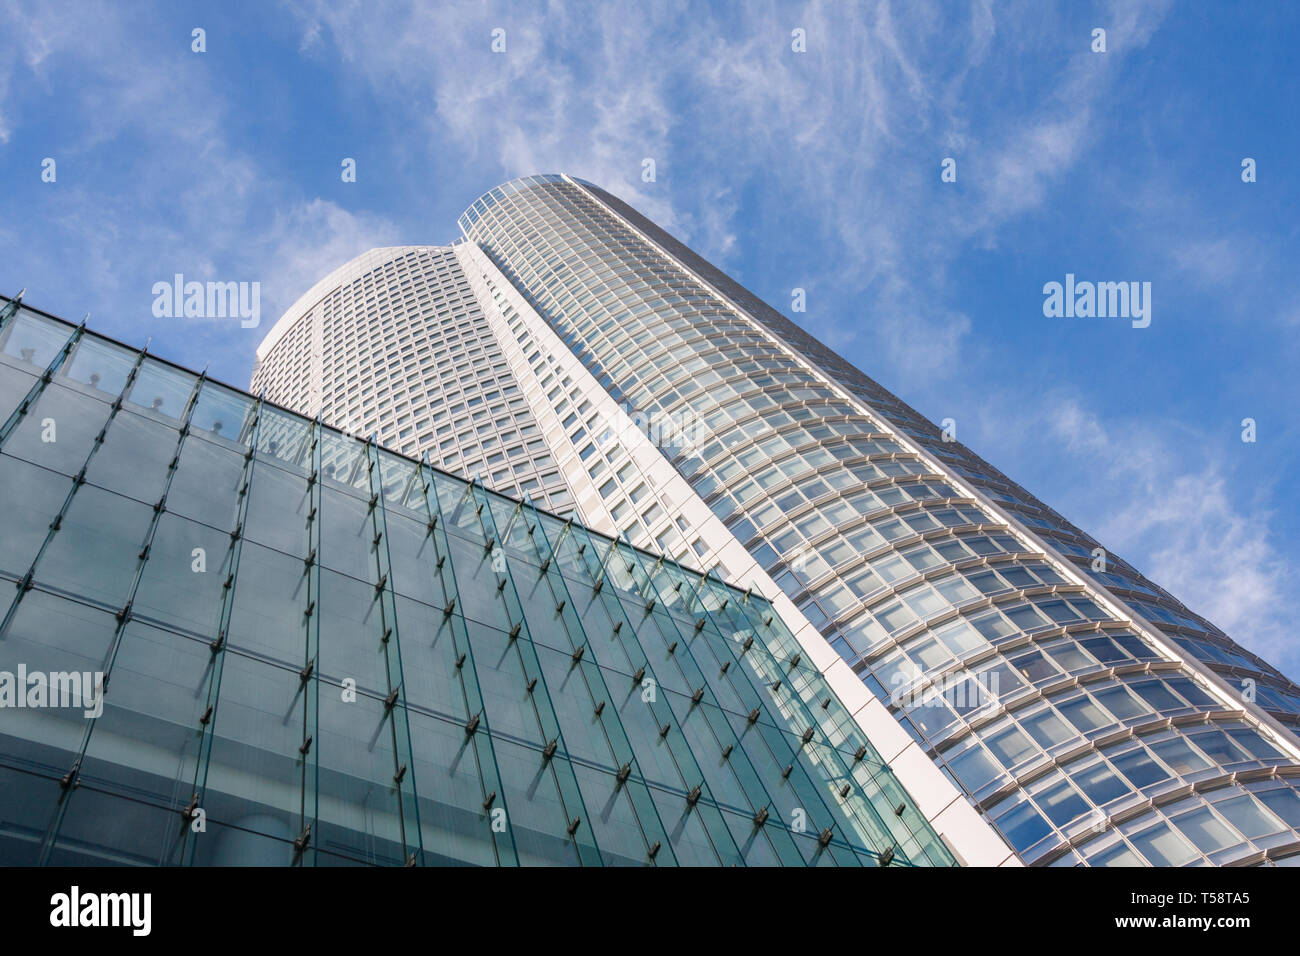 Facade of Roppongi Hills Mori Tower under a blue sky with clouds. With 238m. it is Tokyos 6th highest building. Toky, Japan. Stock Photo